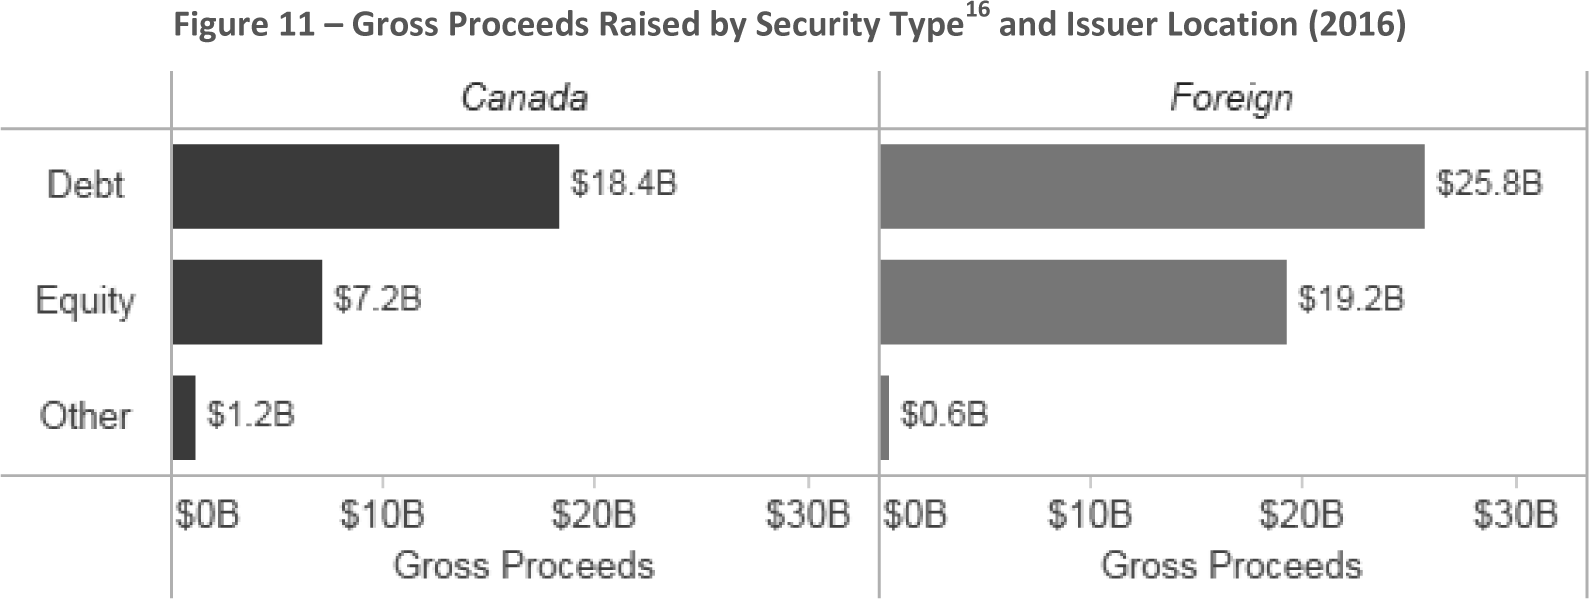 Figure 11 -- Gross Proceeds Raised by Security Type and Issuer Location (2016)